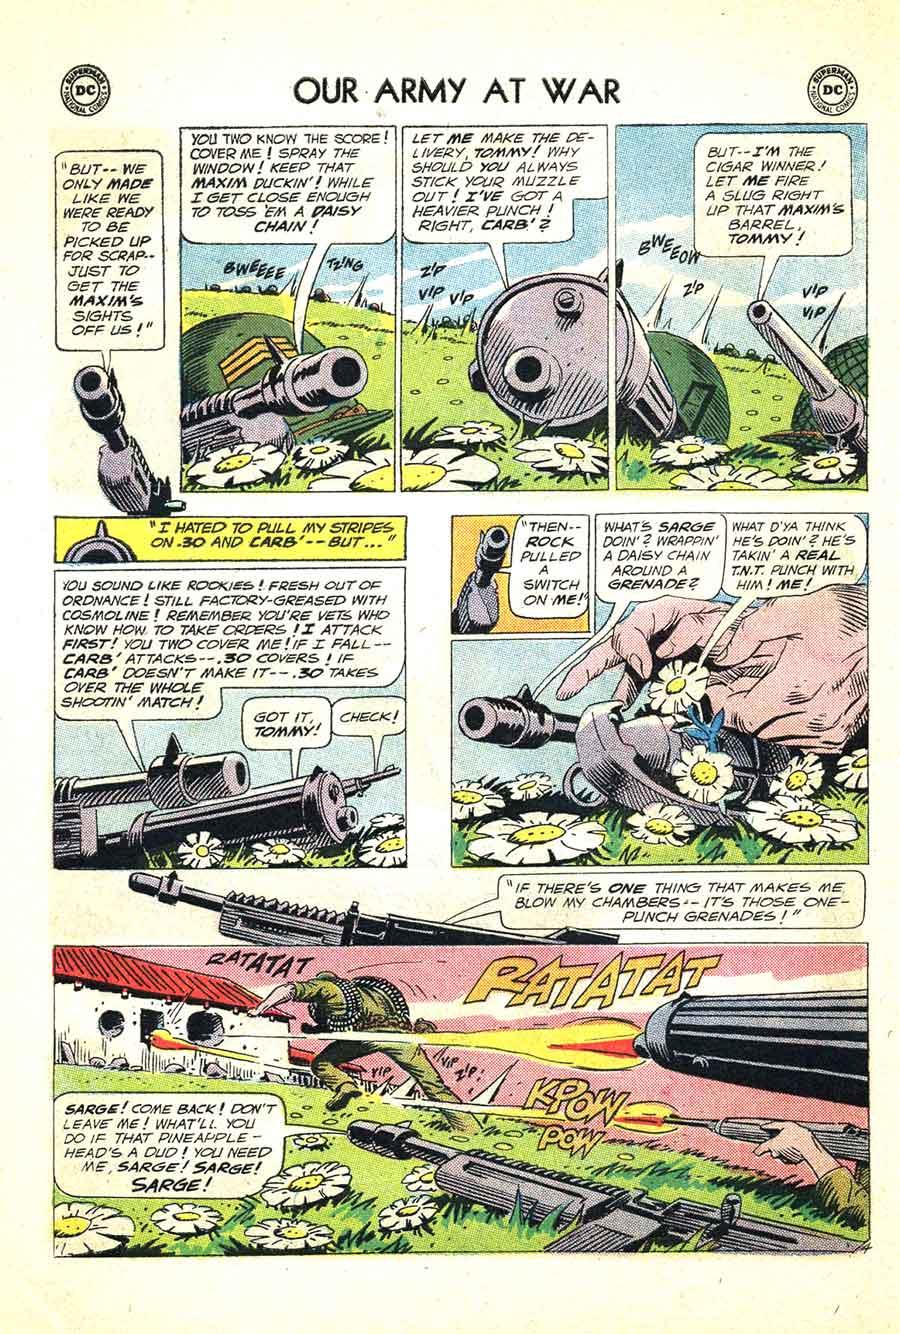 Our Army at War #146 dc 1960s silver age comic book page art by Joe Kubert